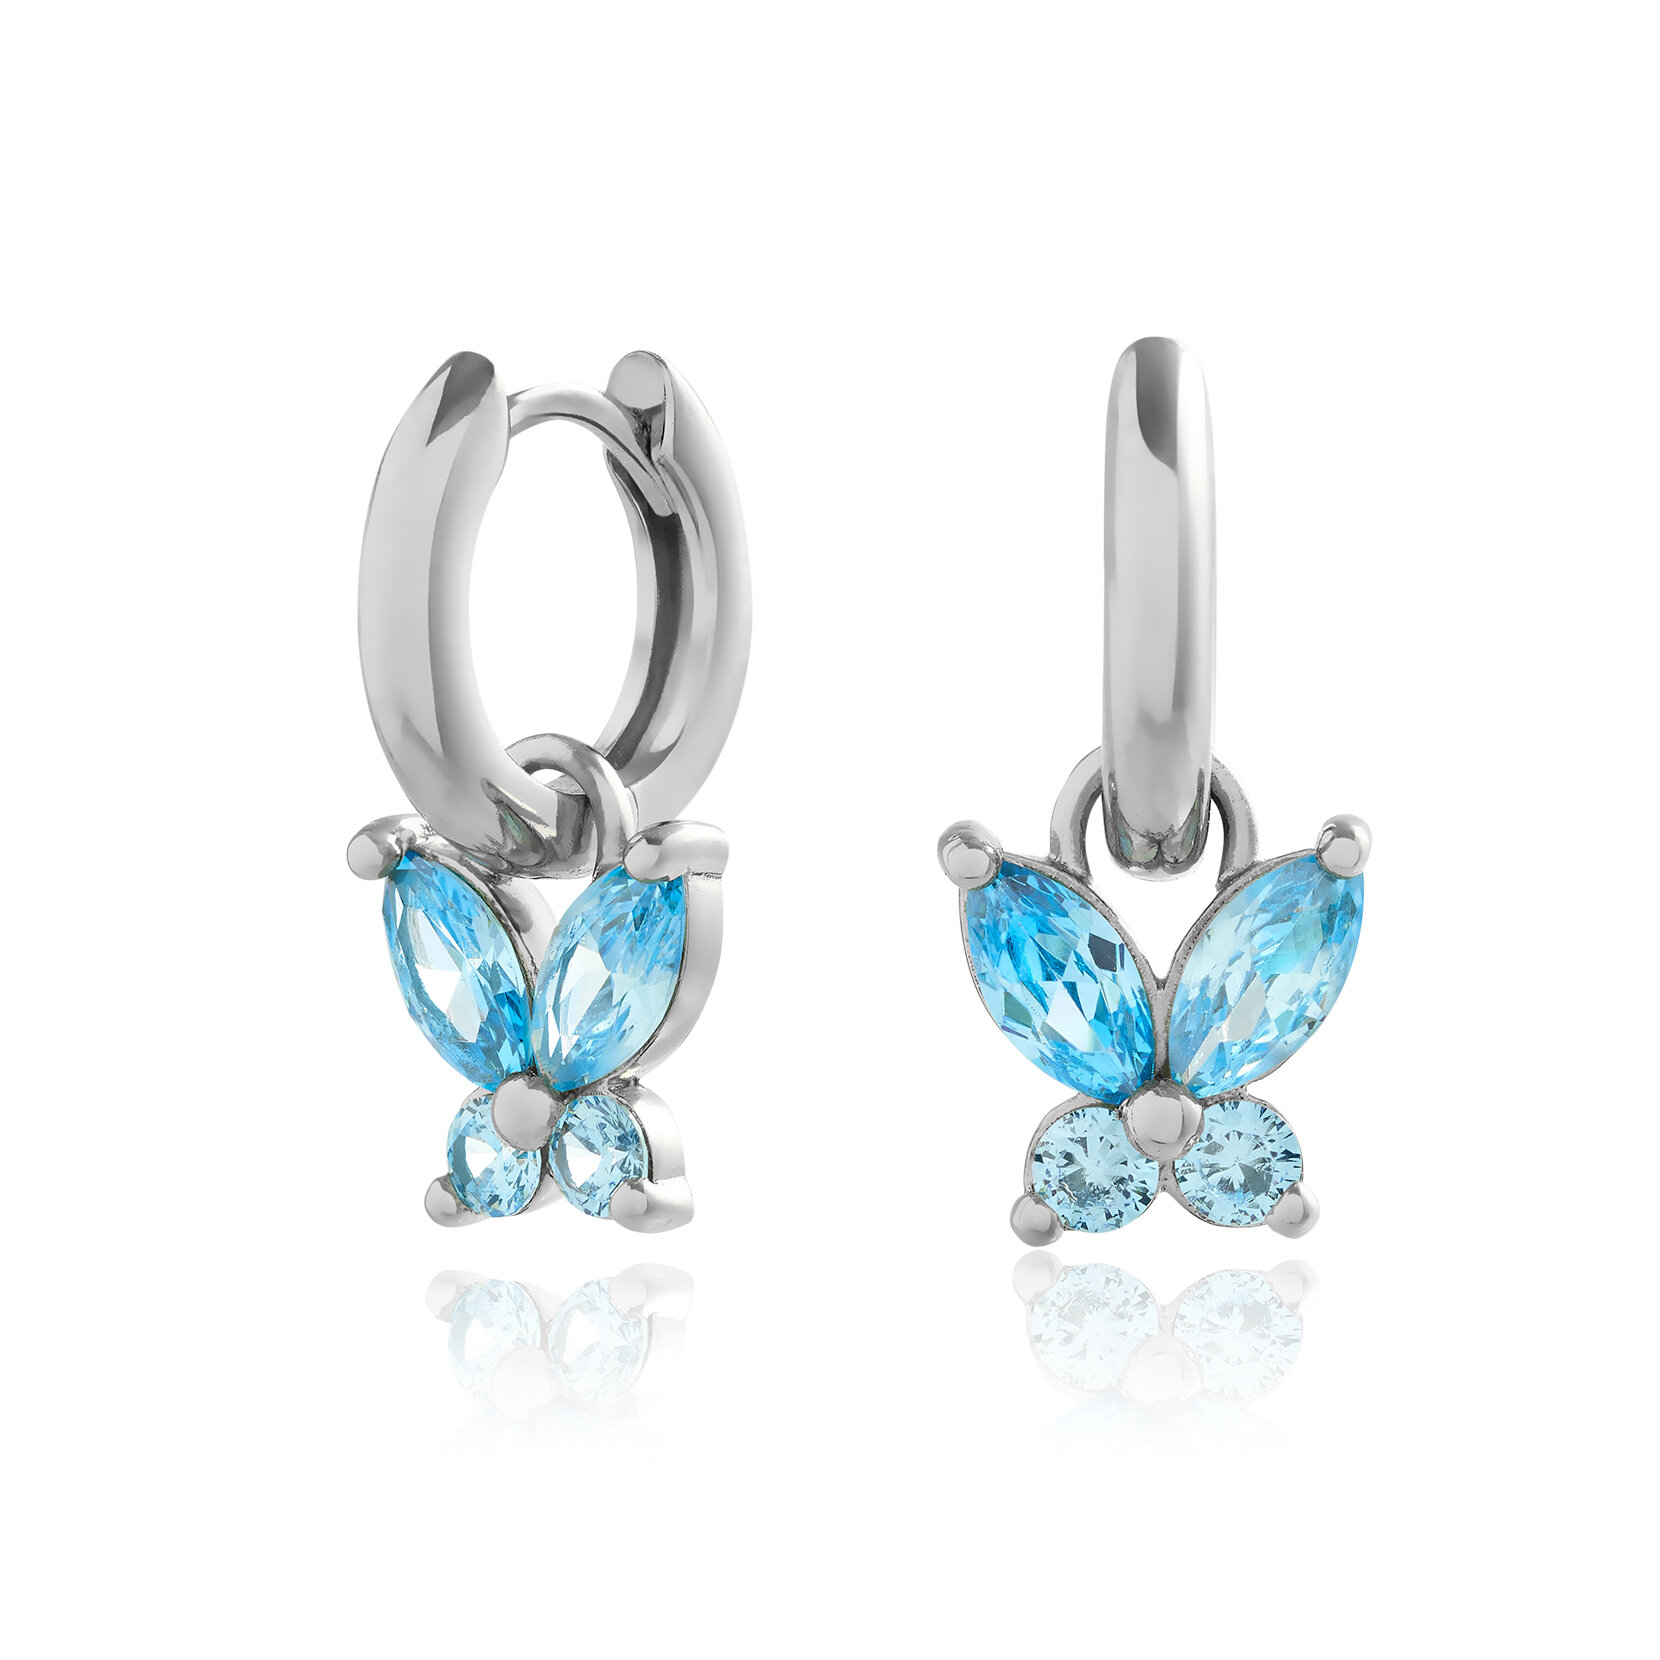 Silver Marquise Earrings